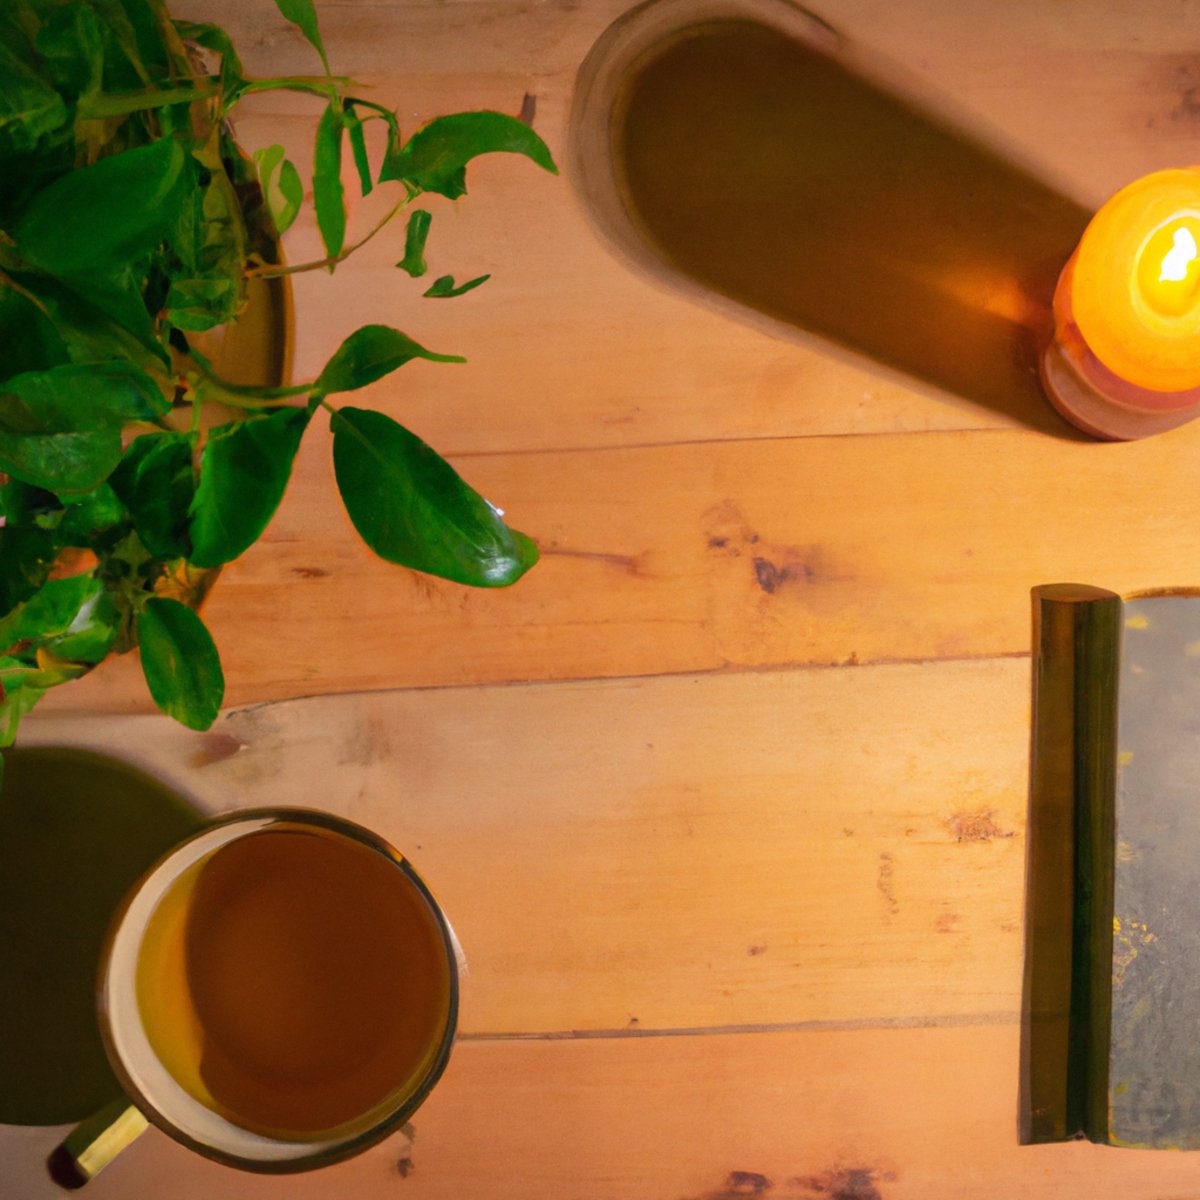 Cozy table with tea, book, plant, and candle. Calm and tranquil atmosphere with a touch of nature.